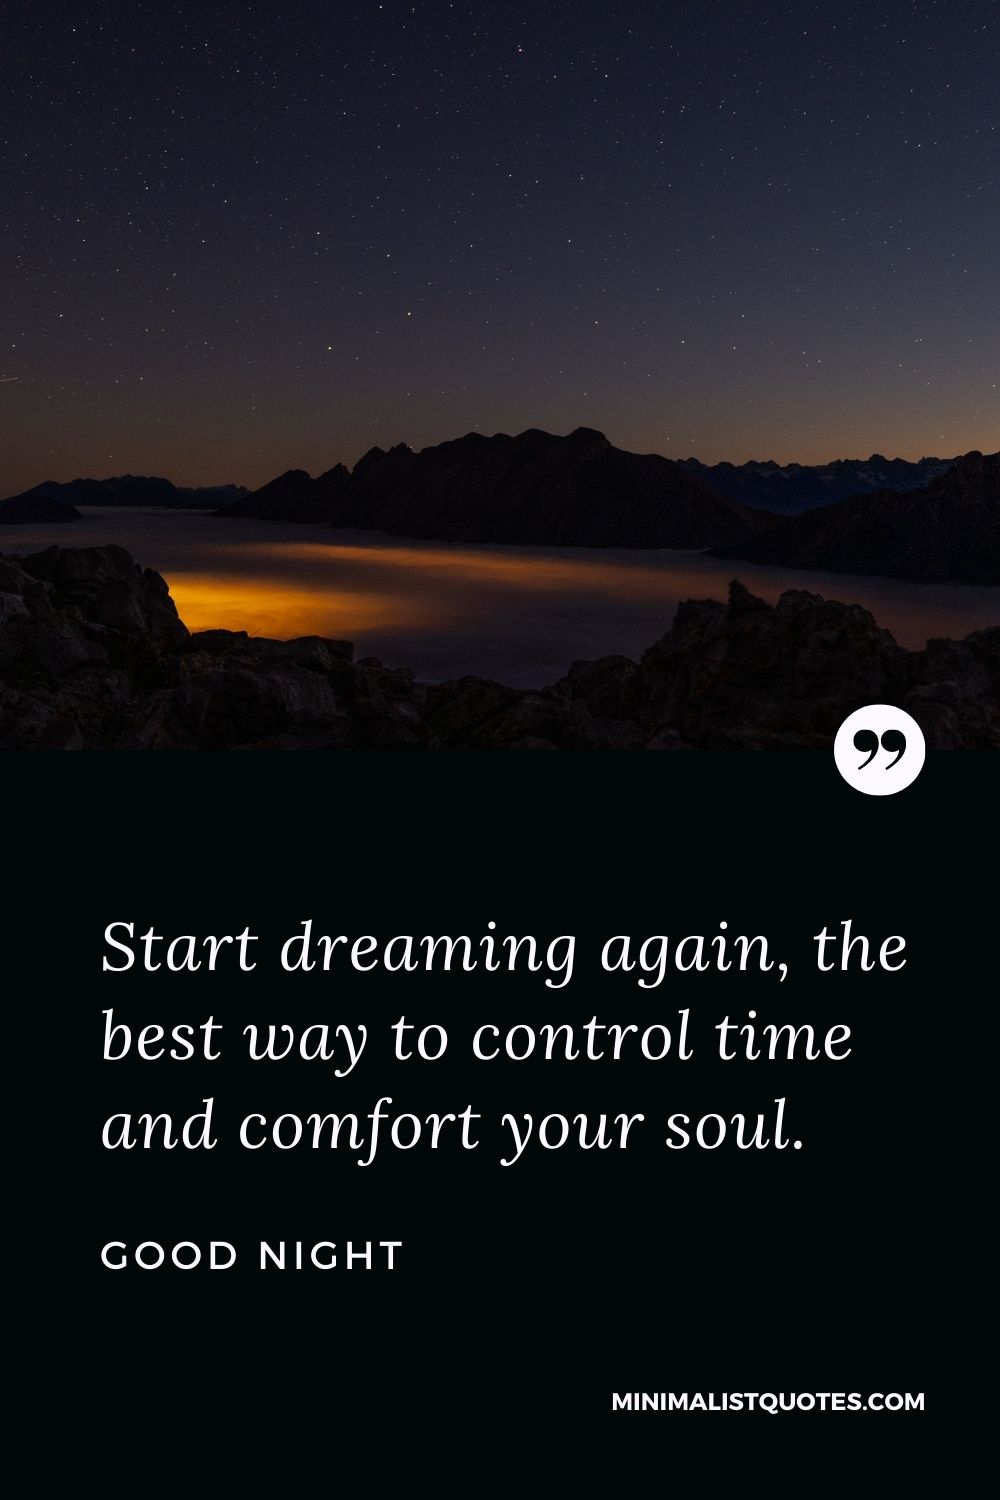 Good Night Wishes - Start dreaming again, the Best way to control time and comfort your soul.